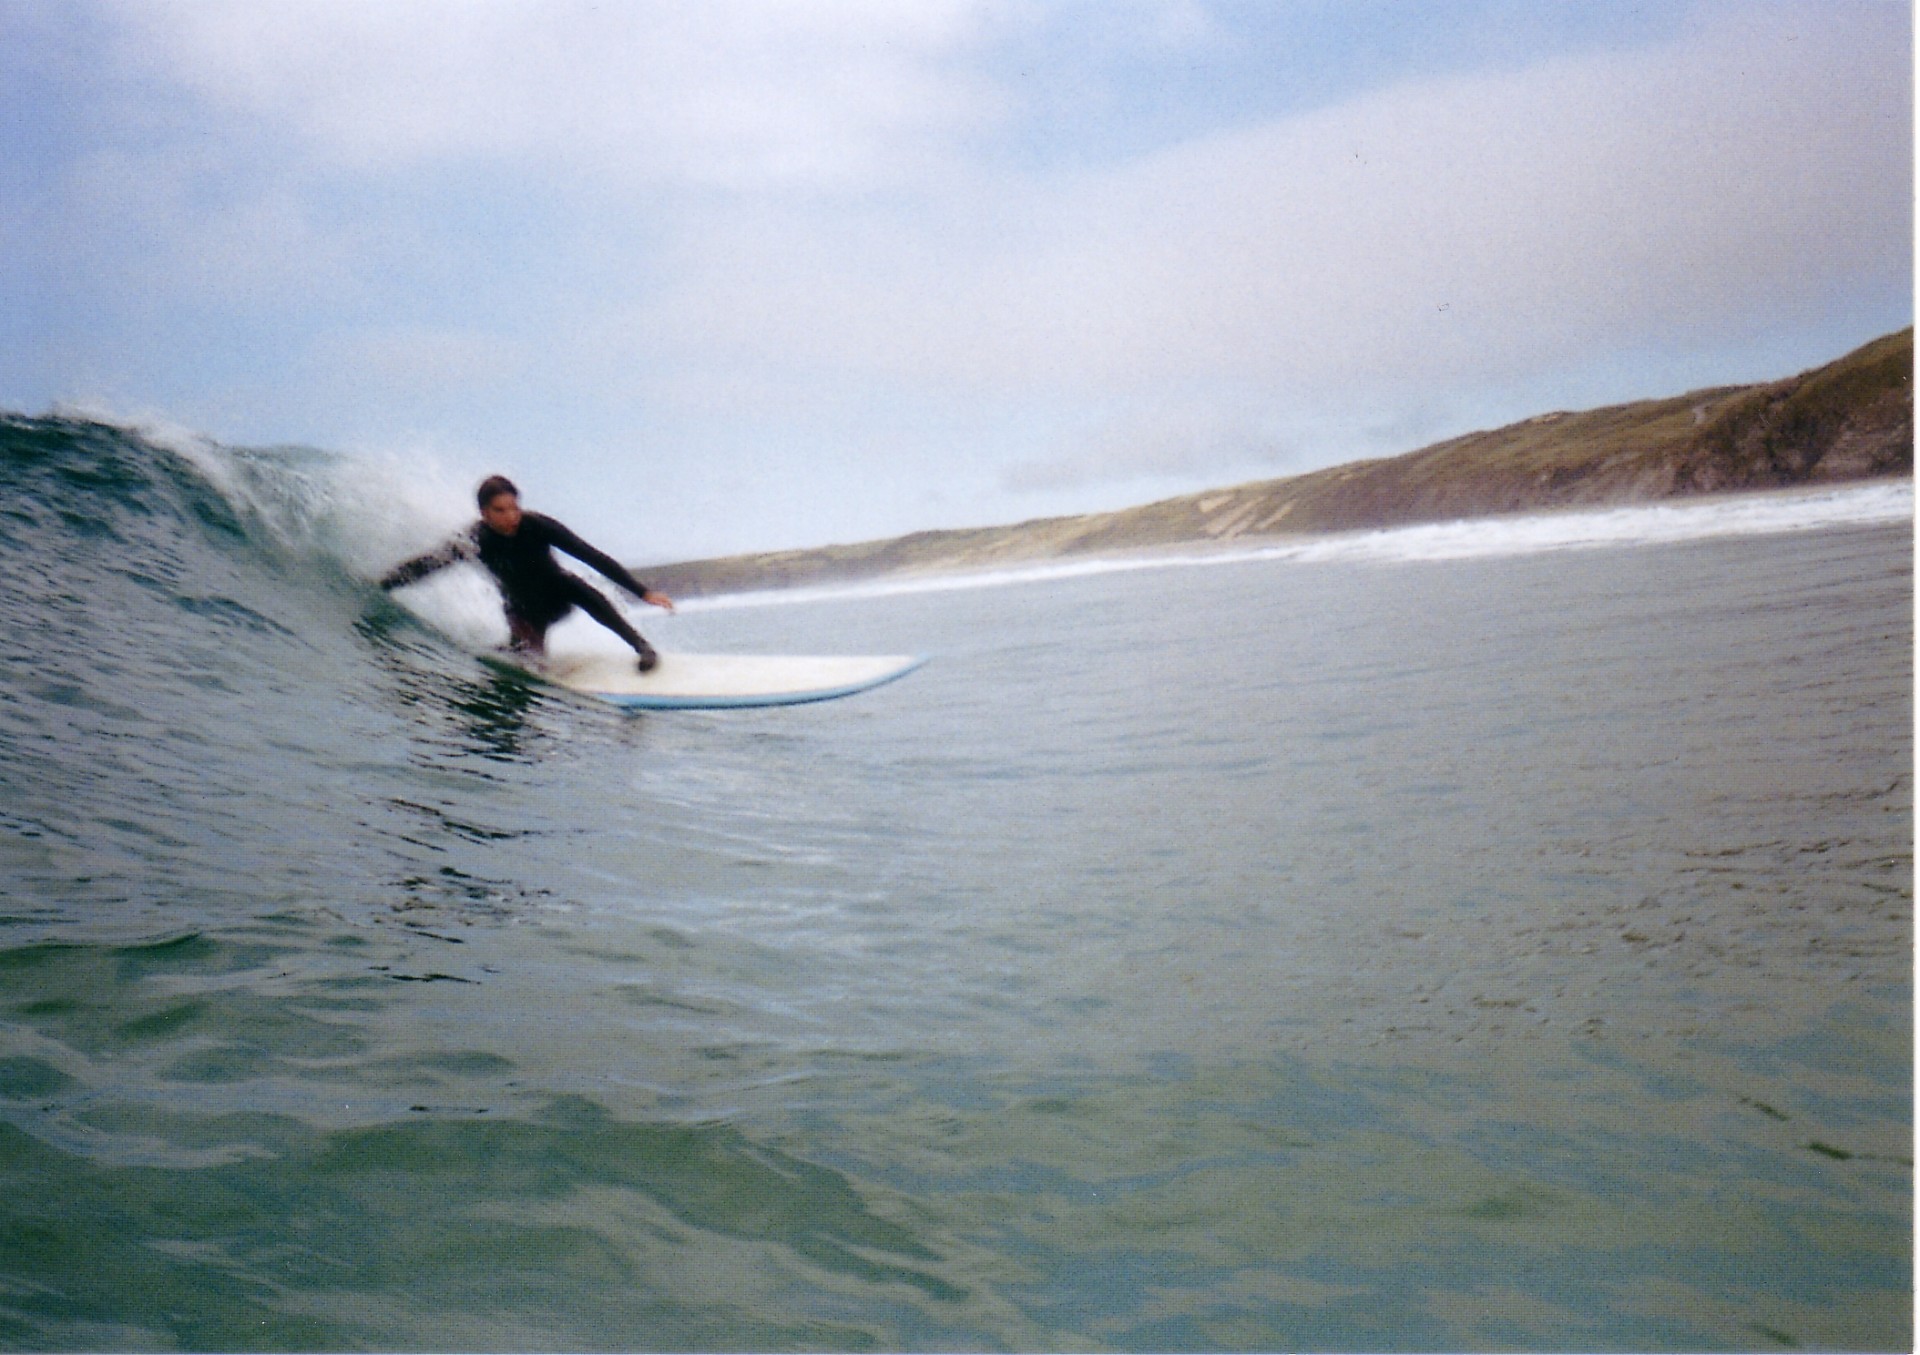 A surfer on a wave. He's crouching, touching the wave with his hand as the wave breaks. The wave is chest high, blue-green color. There are brown-green hills in the background on the land.